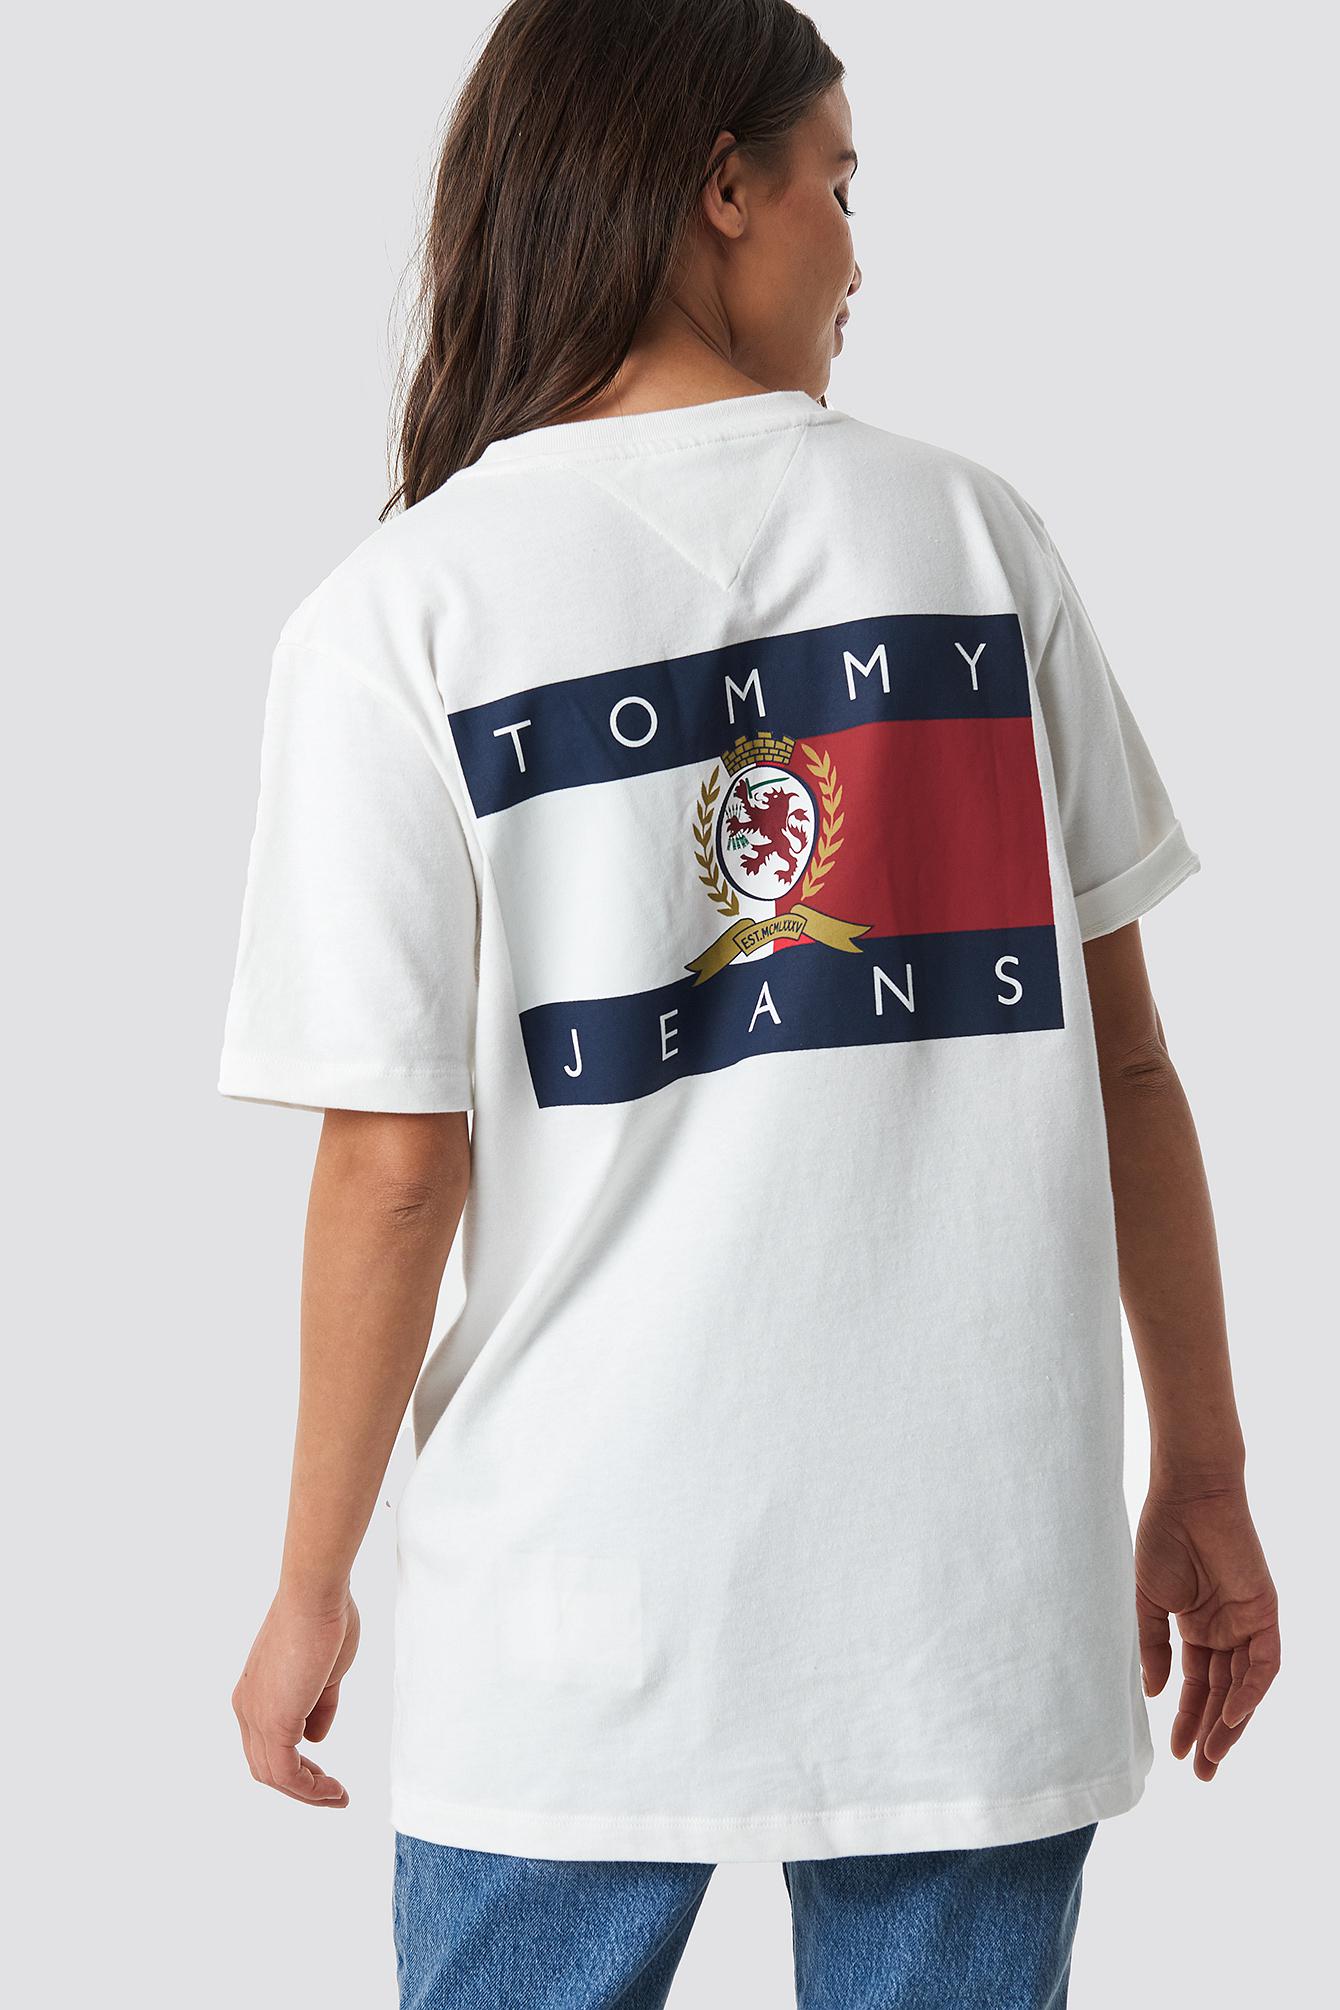 Tommy Crest Flag Tee Hotsell - tundraecology.hi.is 1694481612